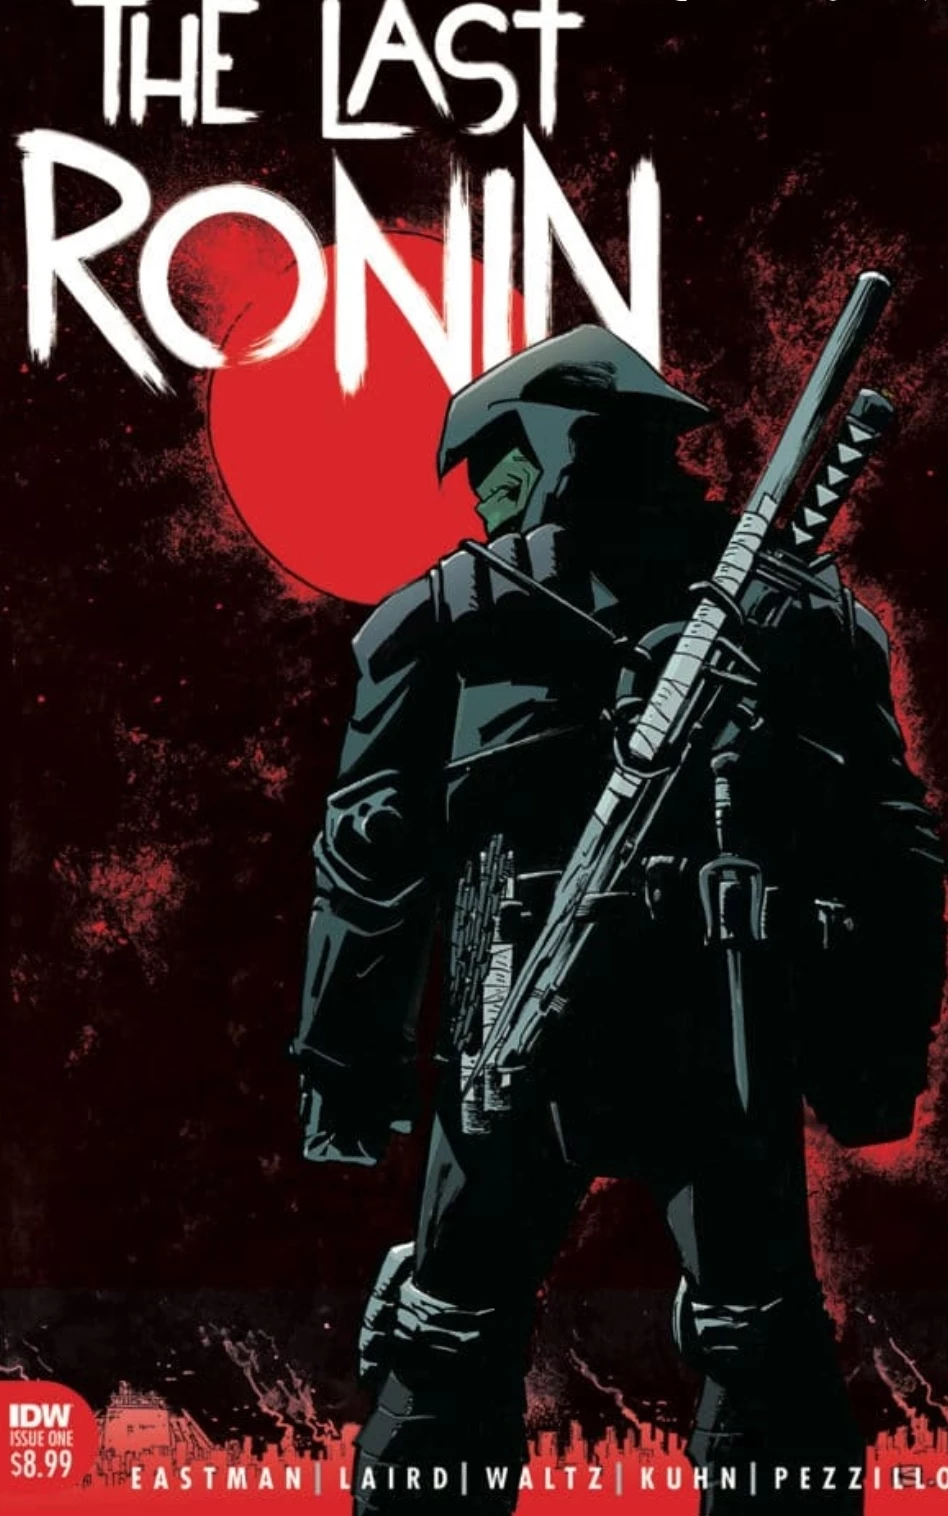 download the rise of ronin